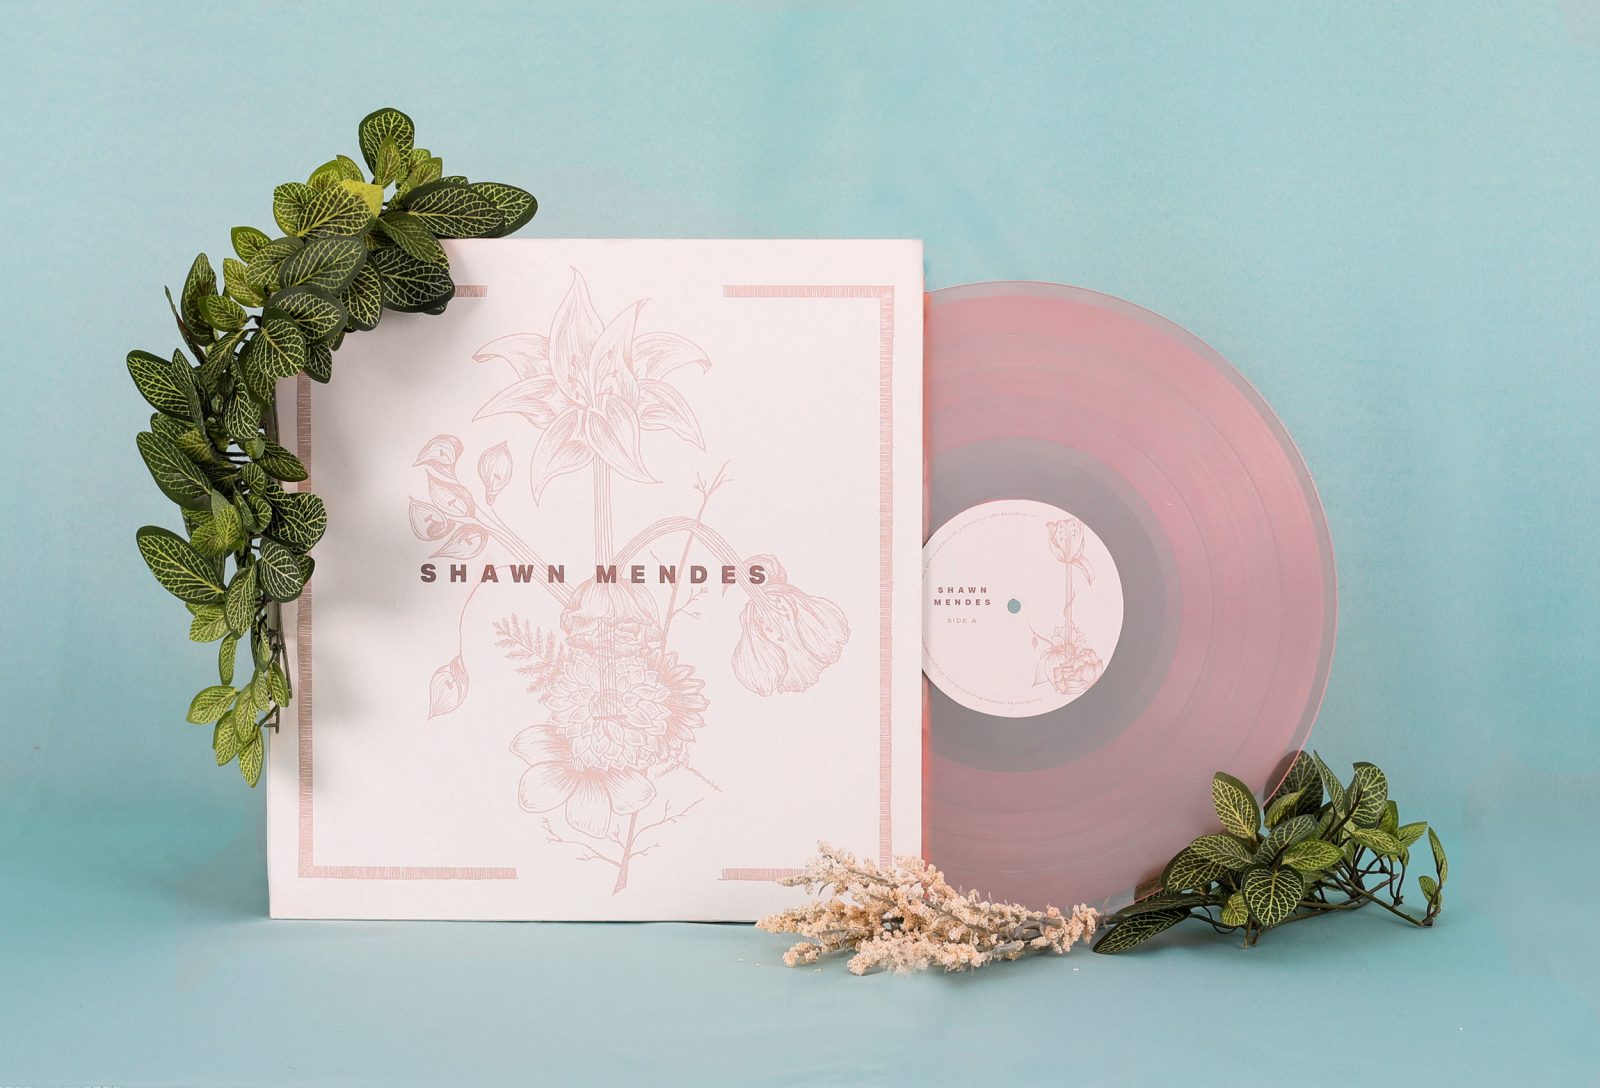 Full Record Packaging Design for Shawn Mendes